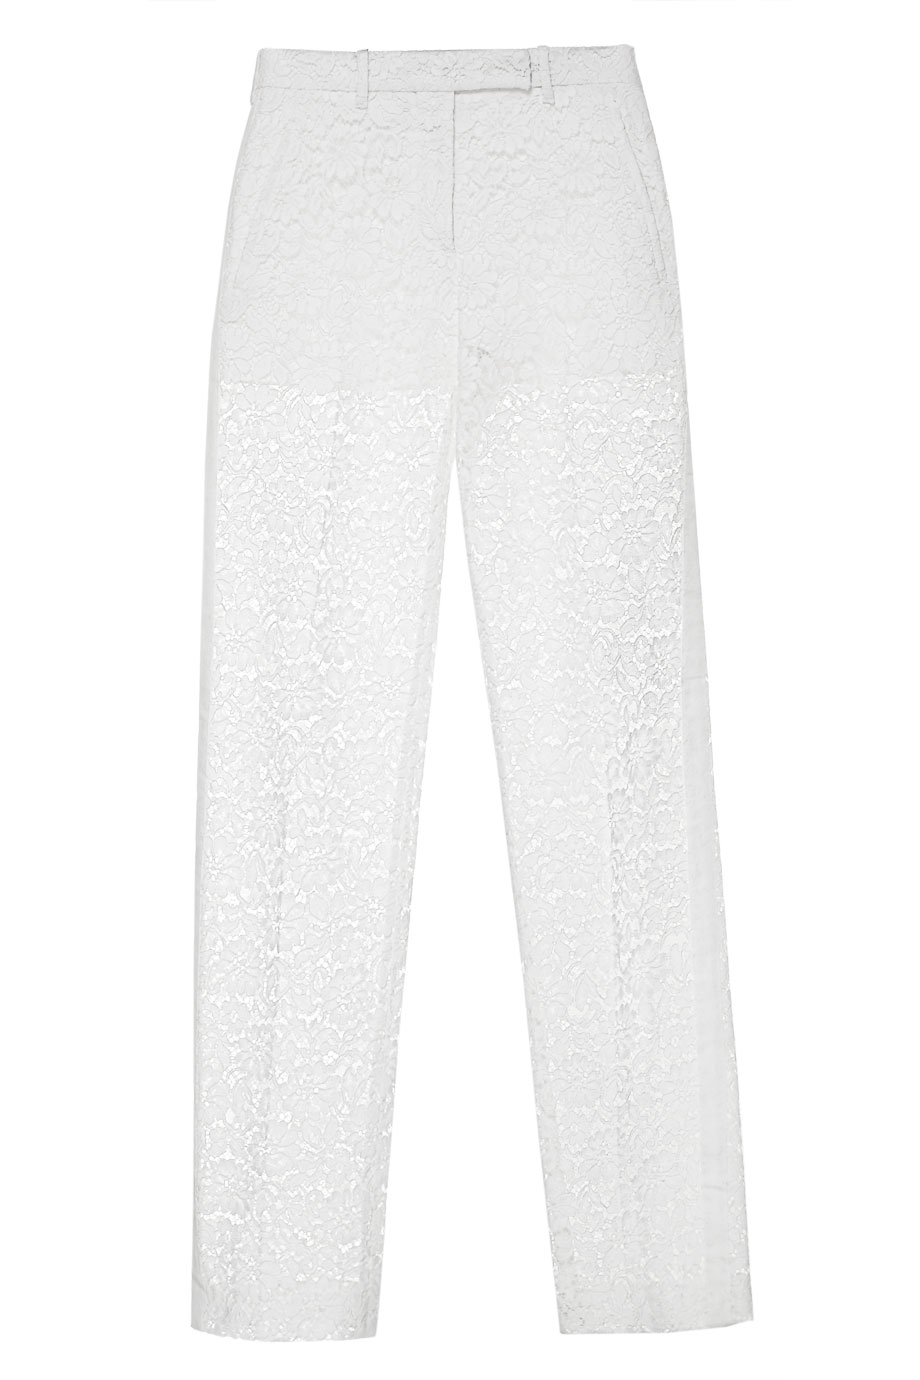 Givenchy White Lace Pants - Lyst